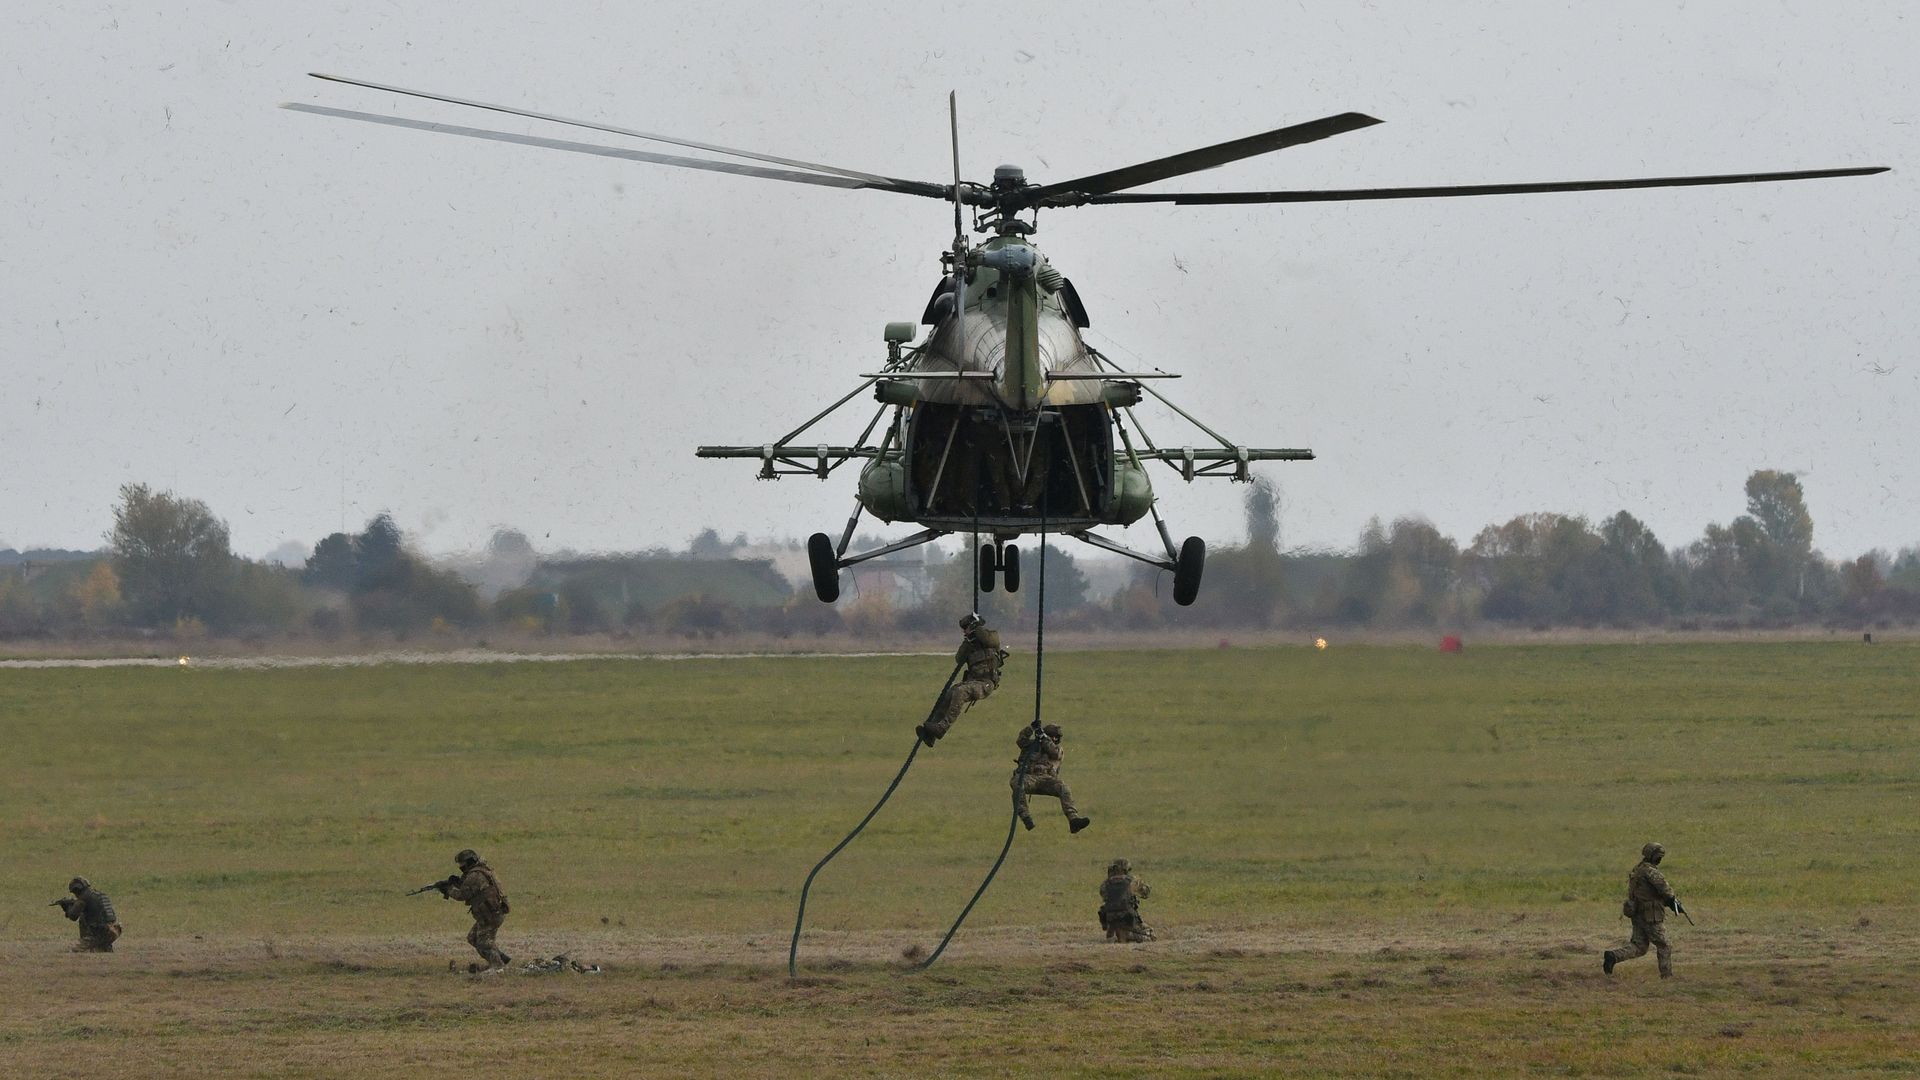 Ukrainian troops are seen repelling from a helicopter while training with U.S. and NATO forces in 2018.